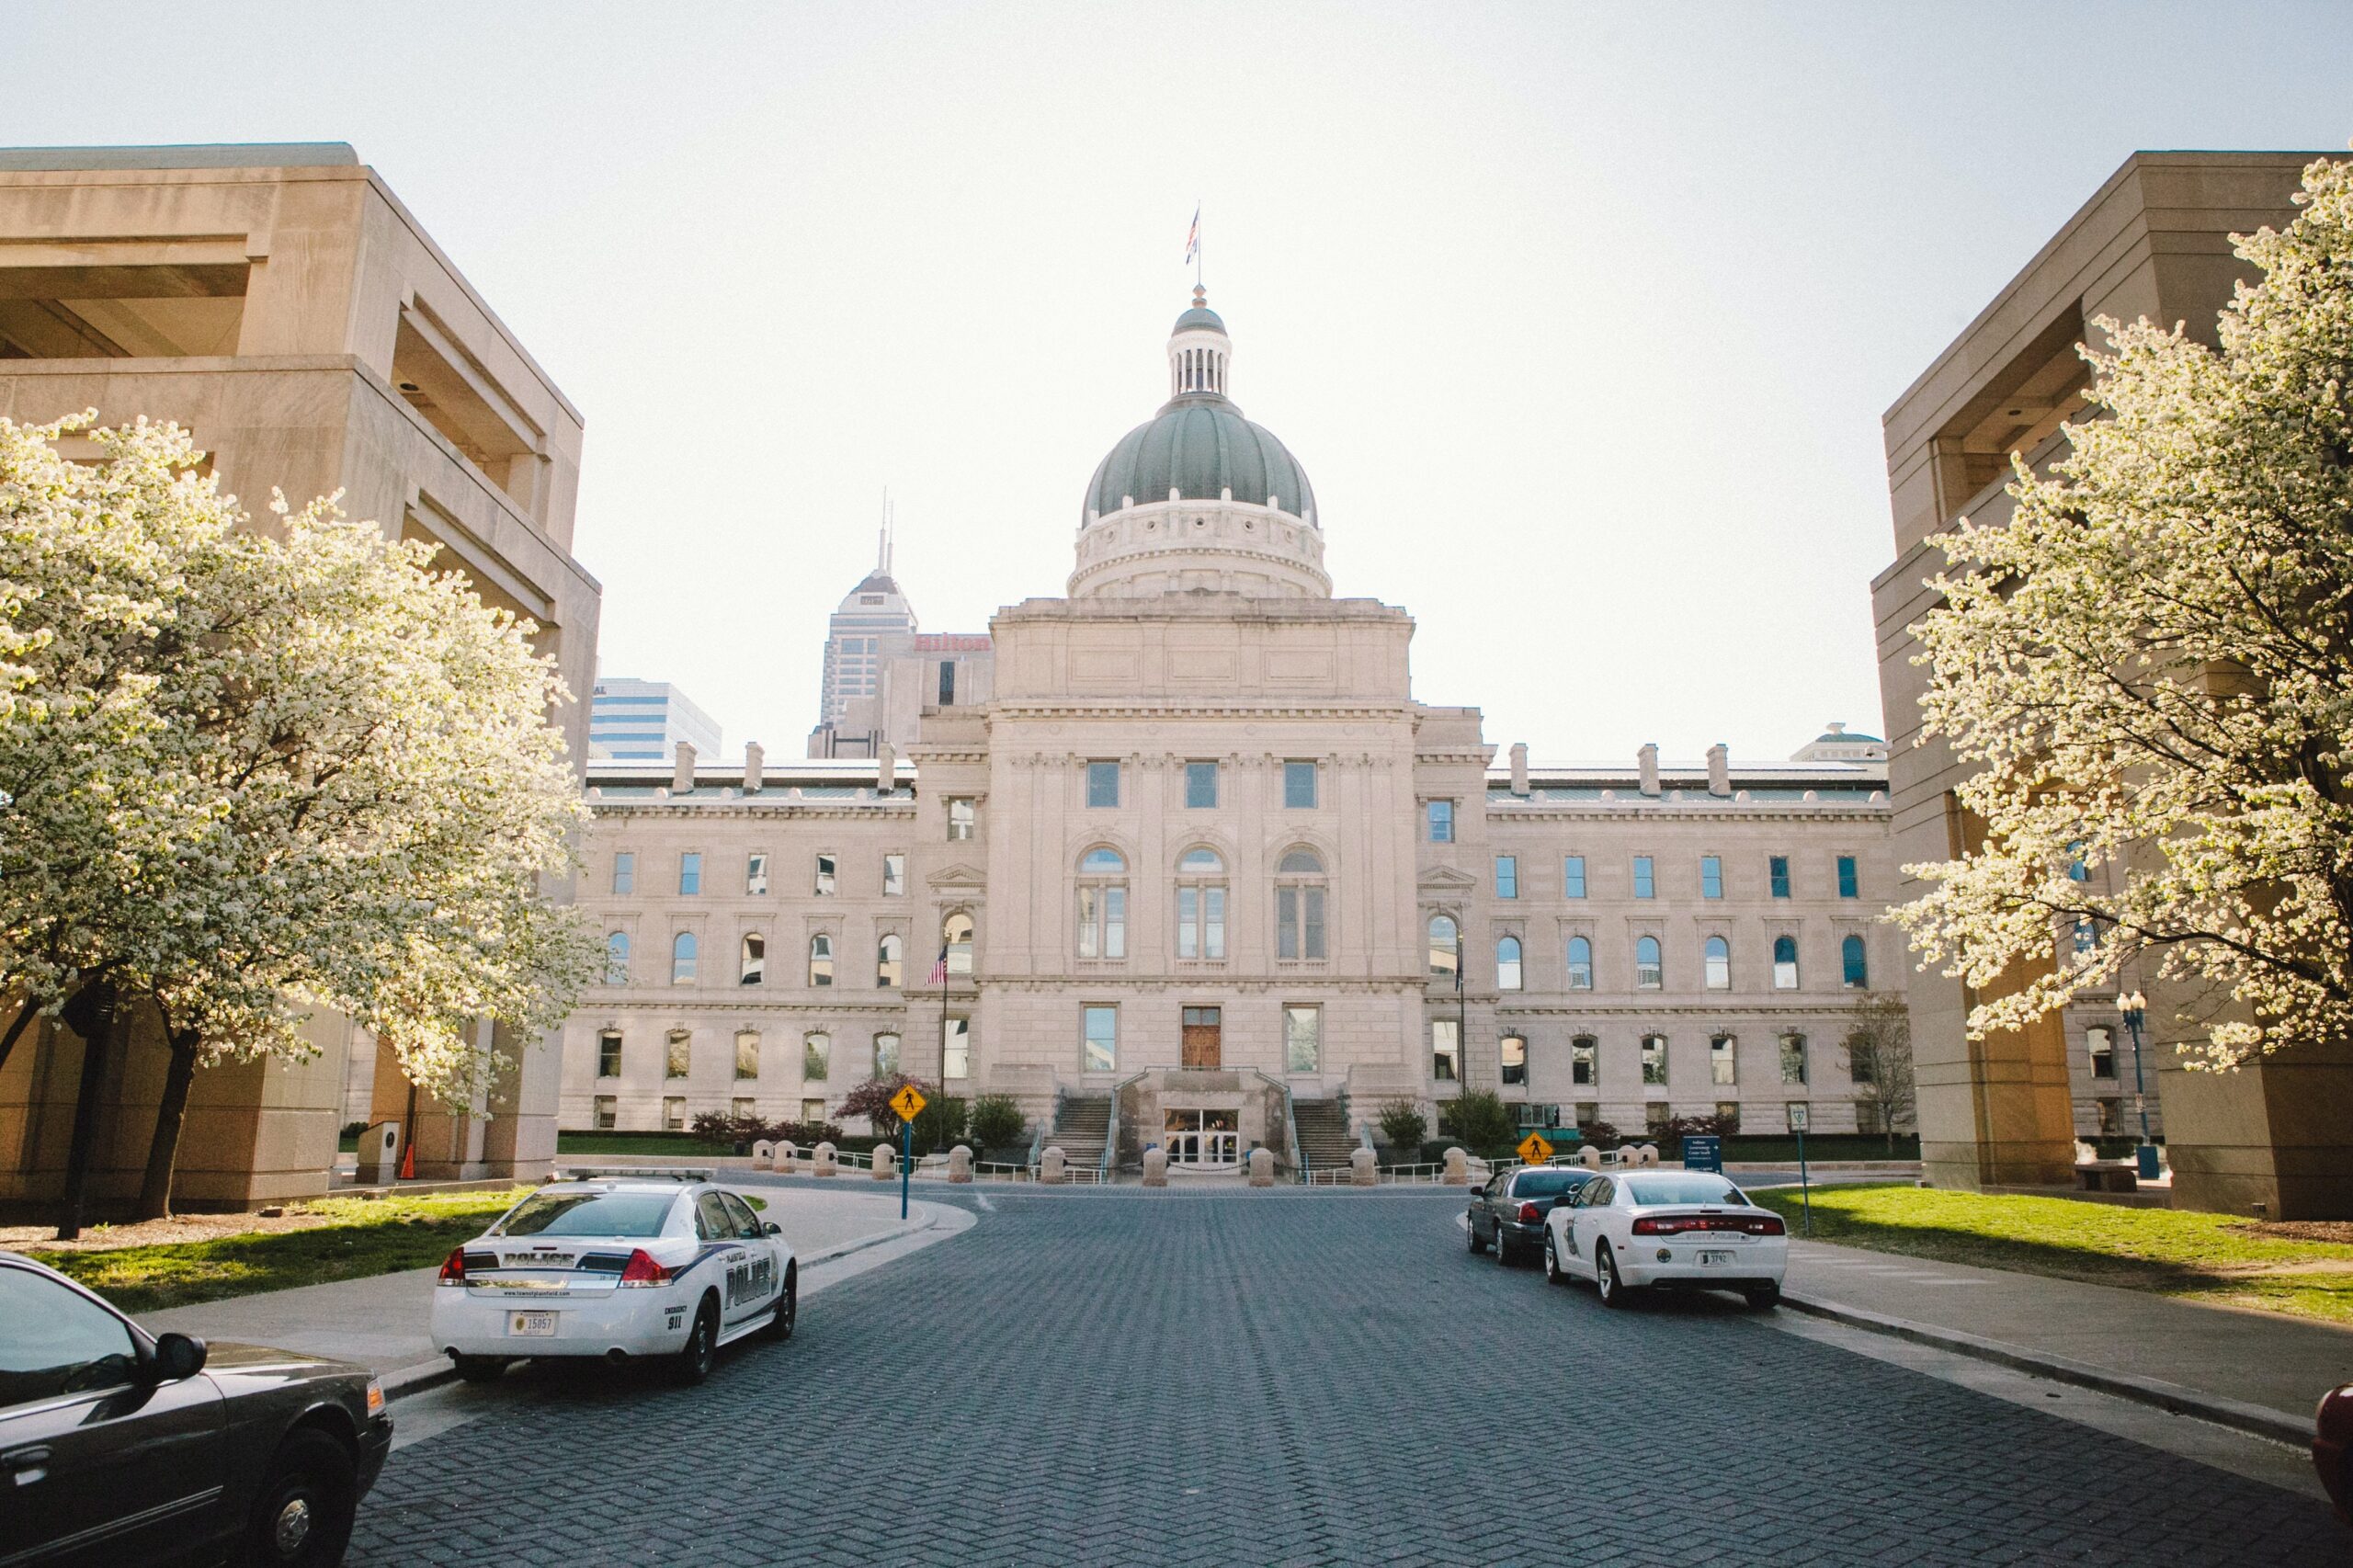 The Indiana State House in Indianapolis